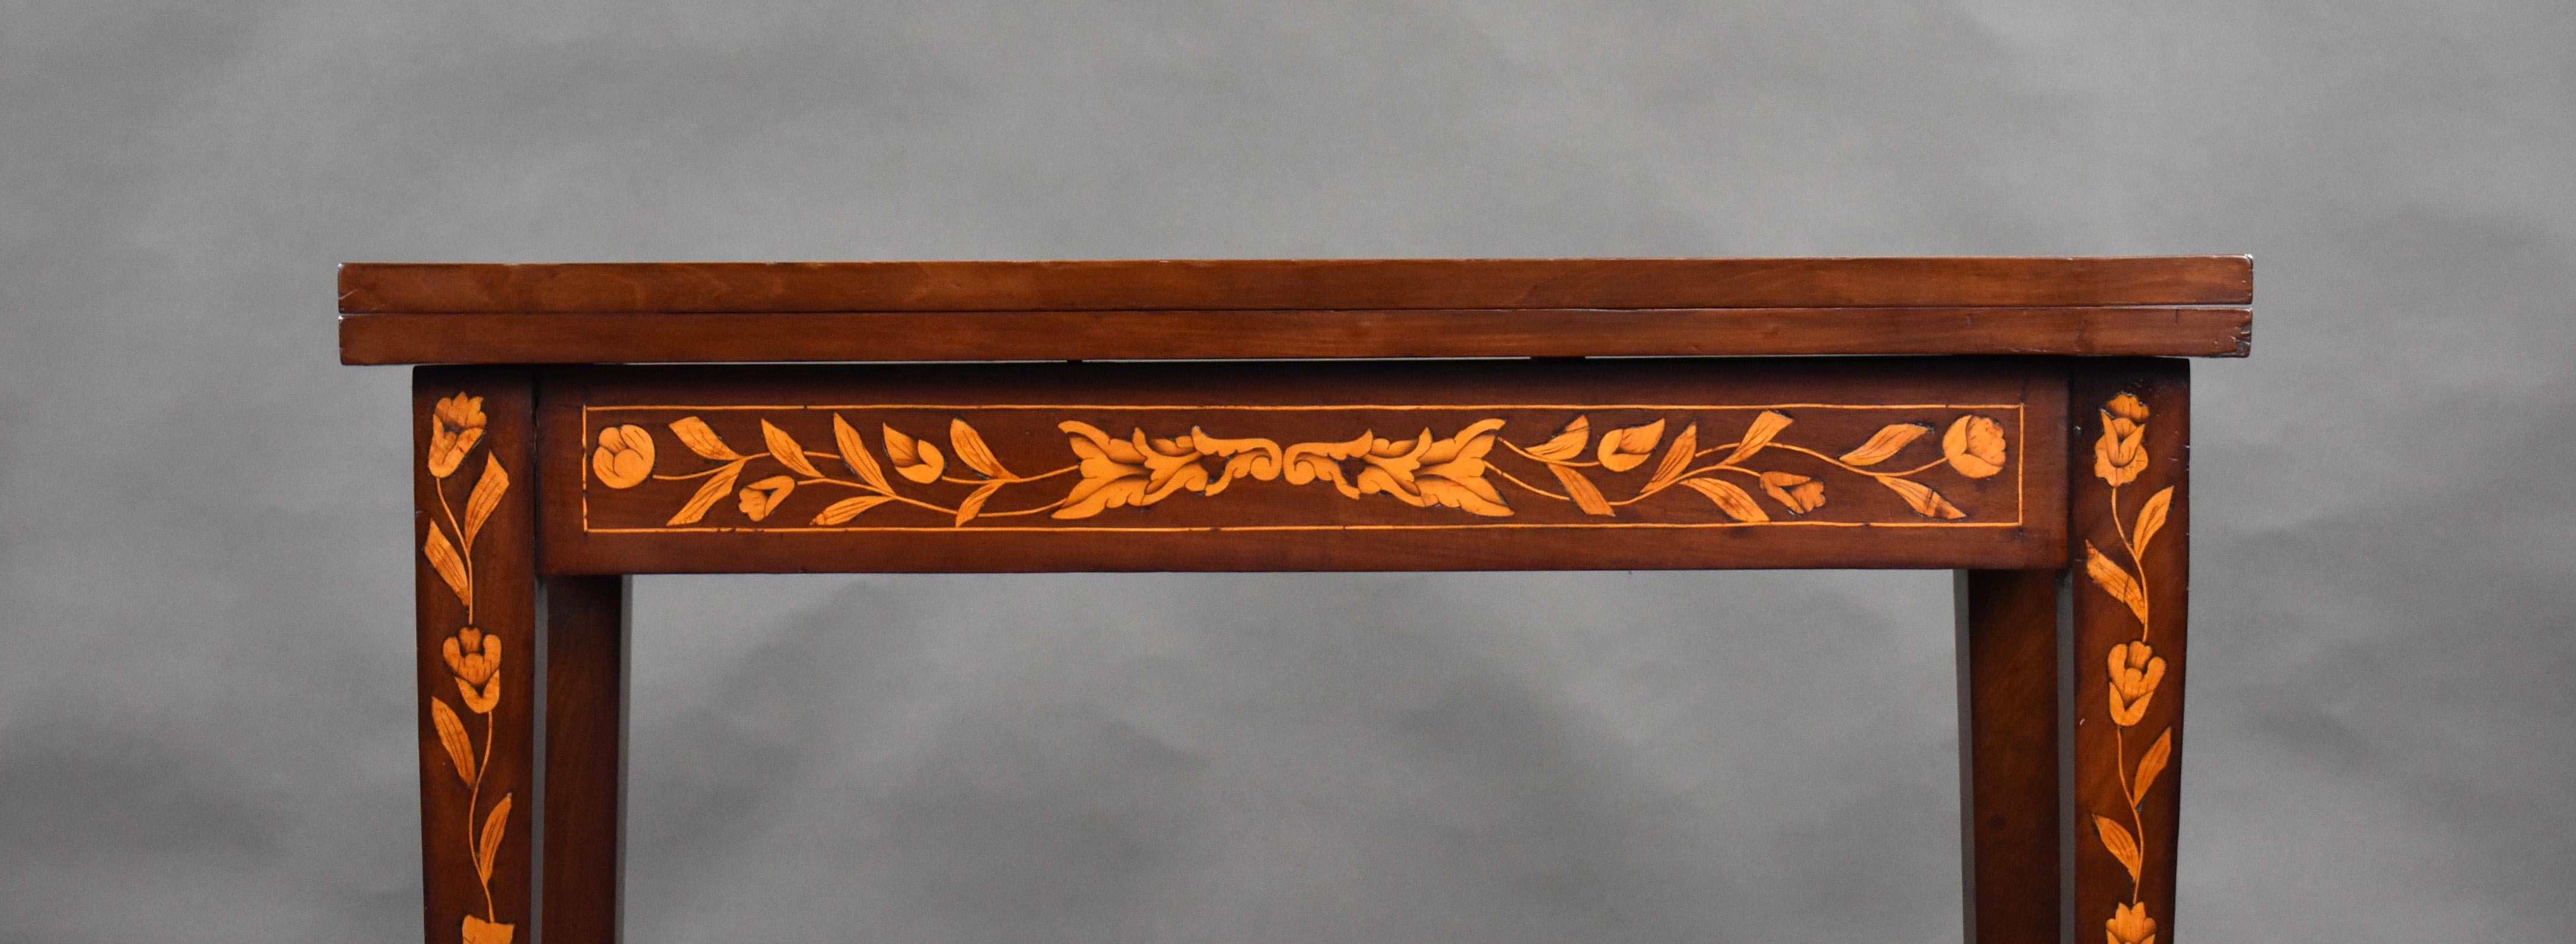 19th Century Dutch Marquetry Card Table For Sale 5